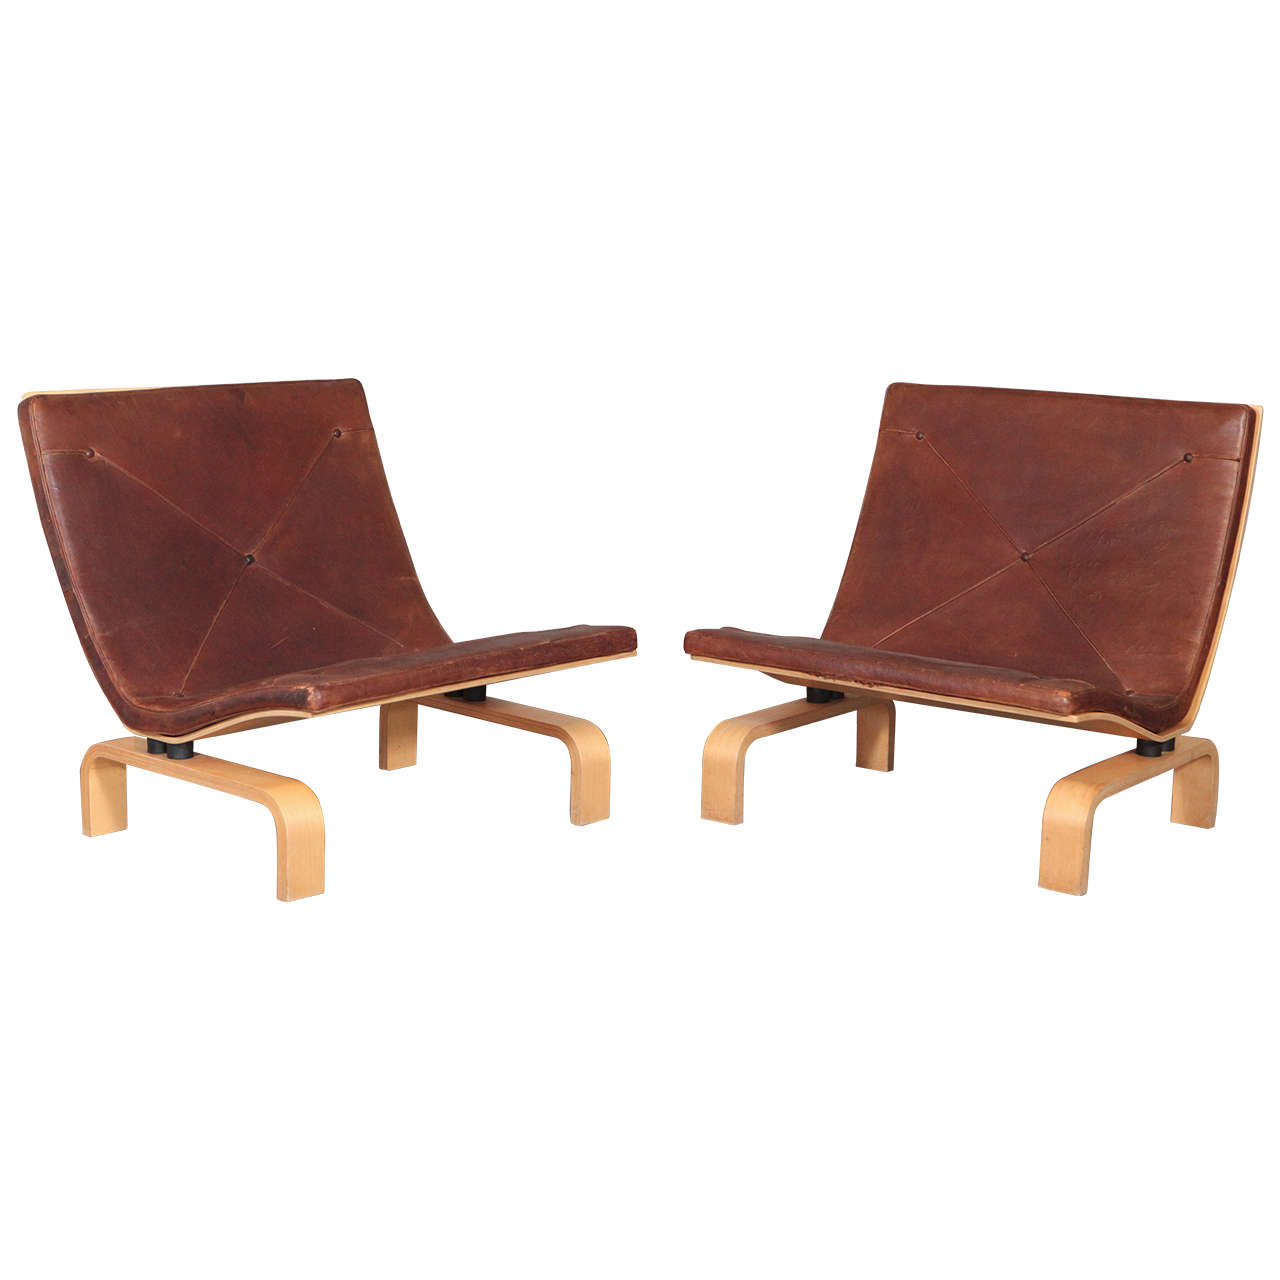 Pair of Poul Kjærholm PK 27 Easy Chairs For Sale